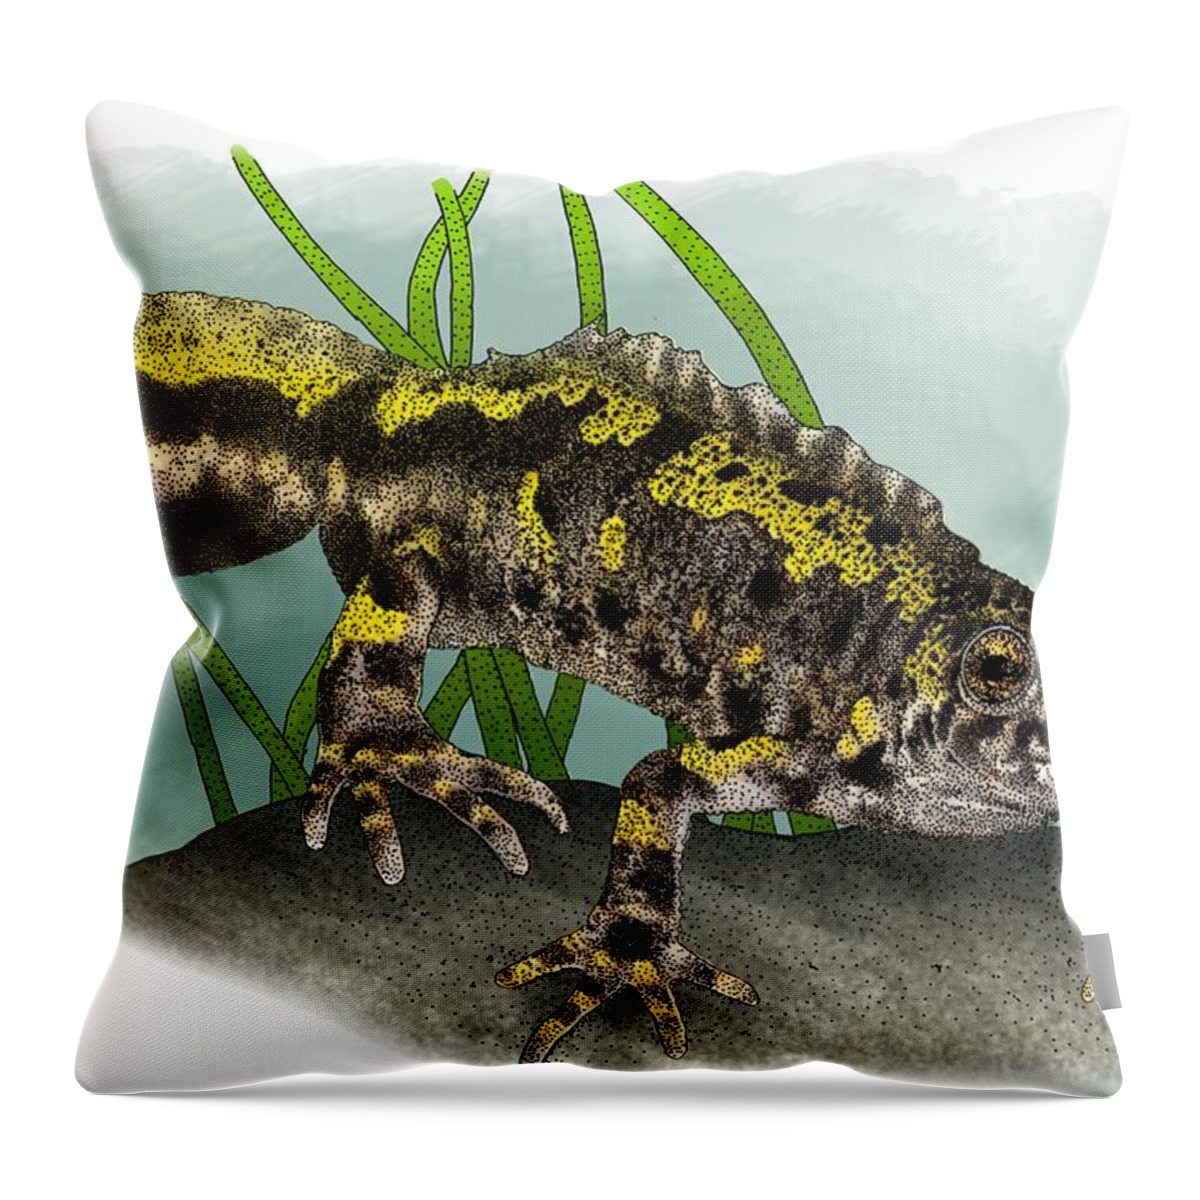 Marbled Newt Throw Pillow featuring the photograph Marbled Newt by Roger Hall